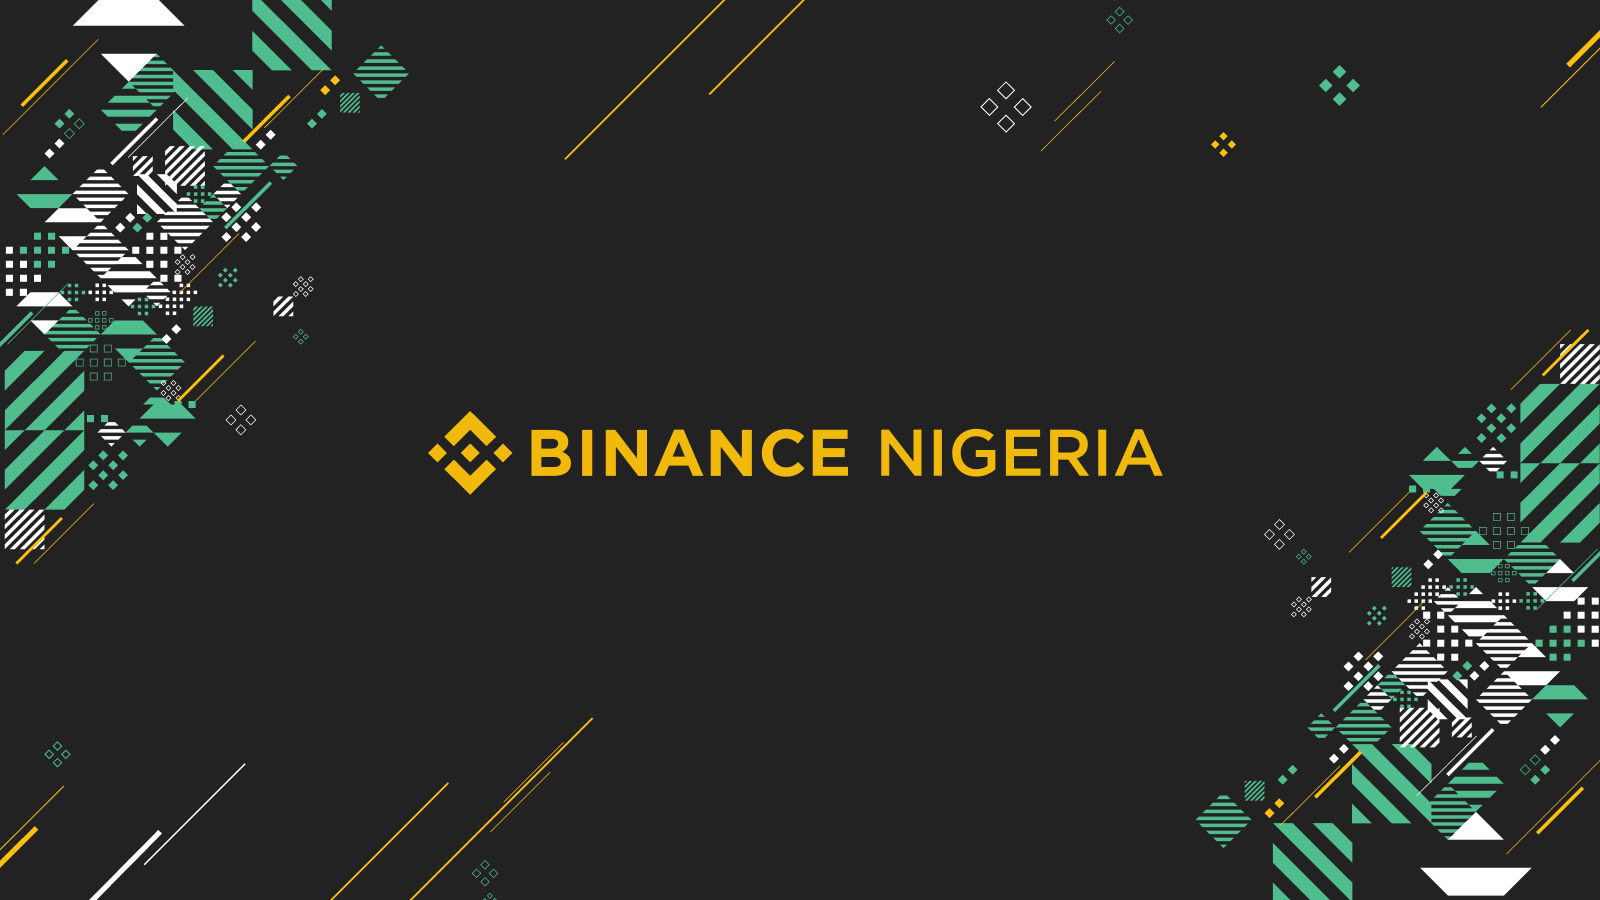 binance-and-nigeria-are-in-talks-to-create-a-digital-economy-powered-by-blockchain